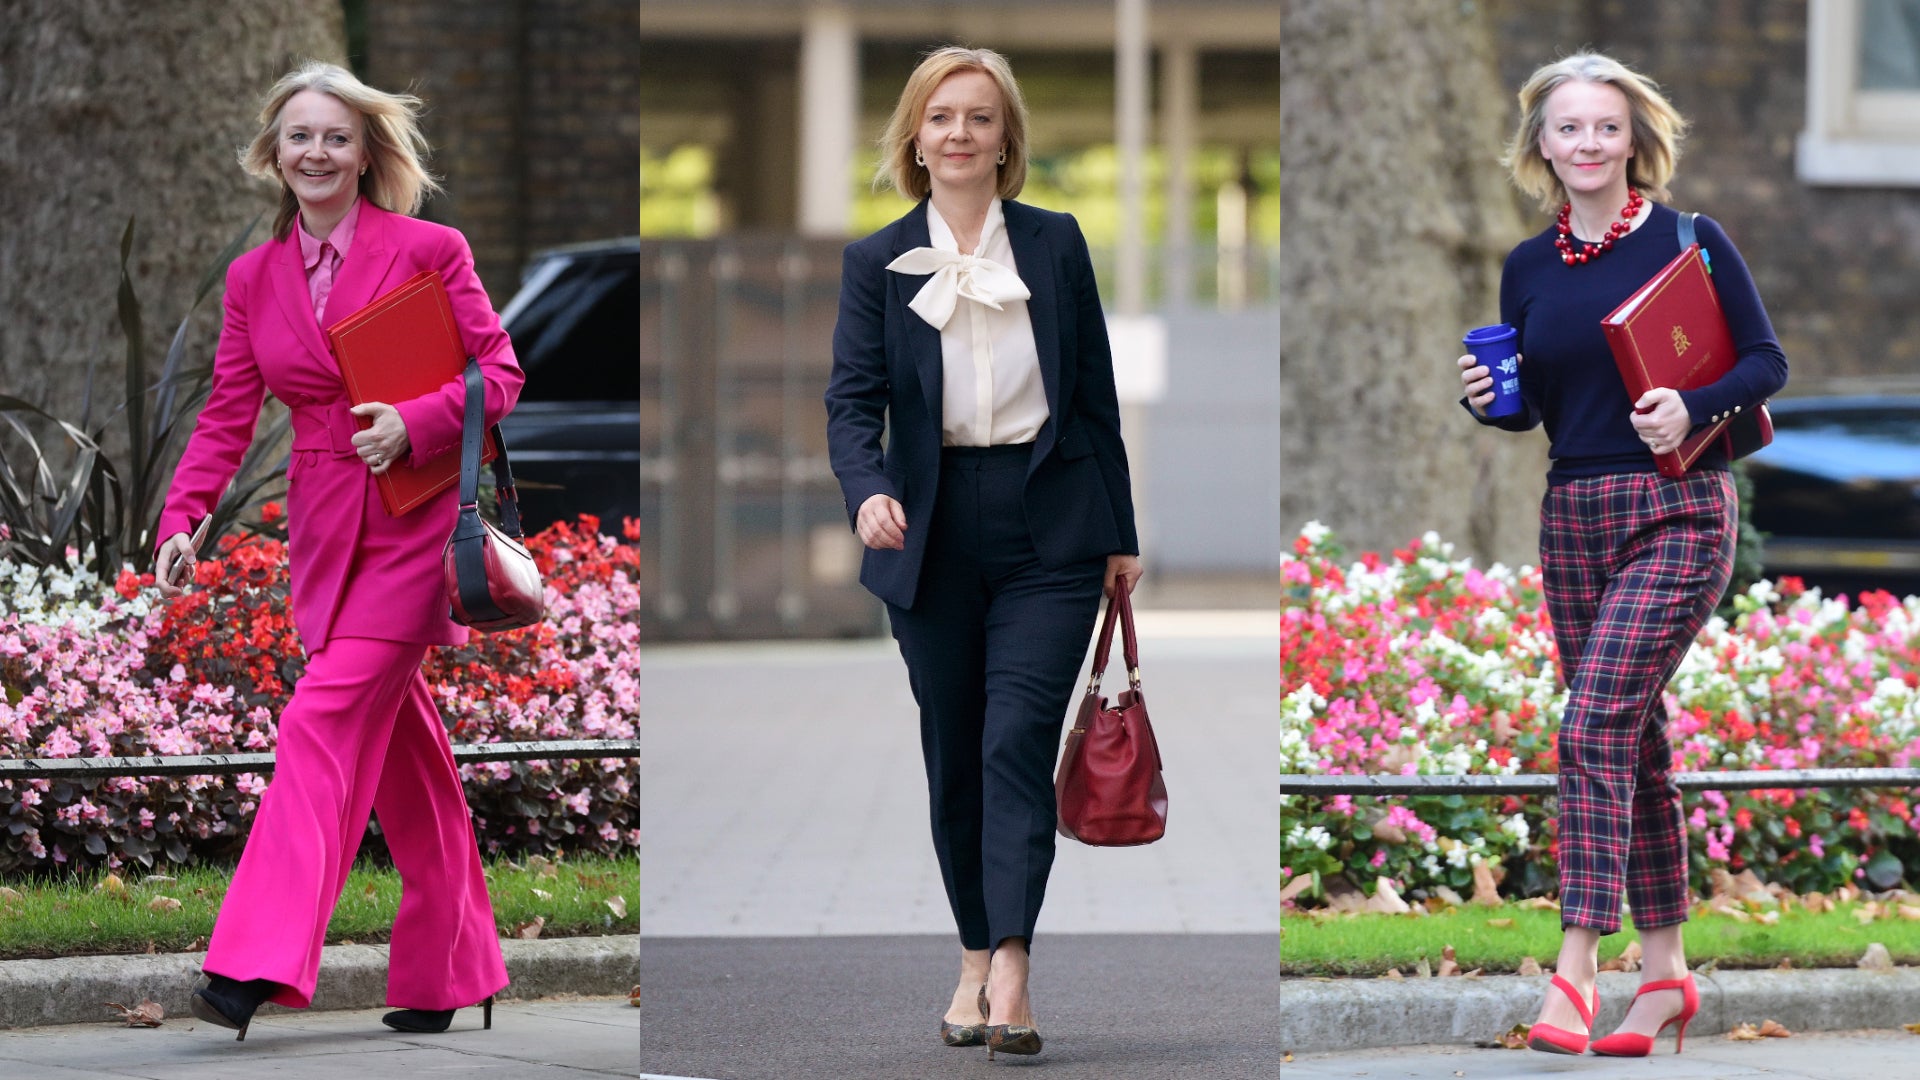 Liz Truss has worn a number of eye-catching outfits during her political career (Jonathan Brady/Victoria Jones/David Mirzoeff/PA)